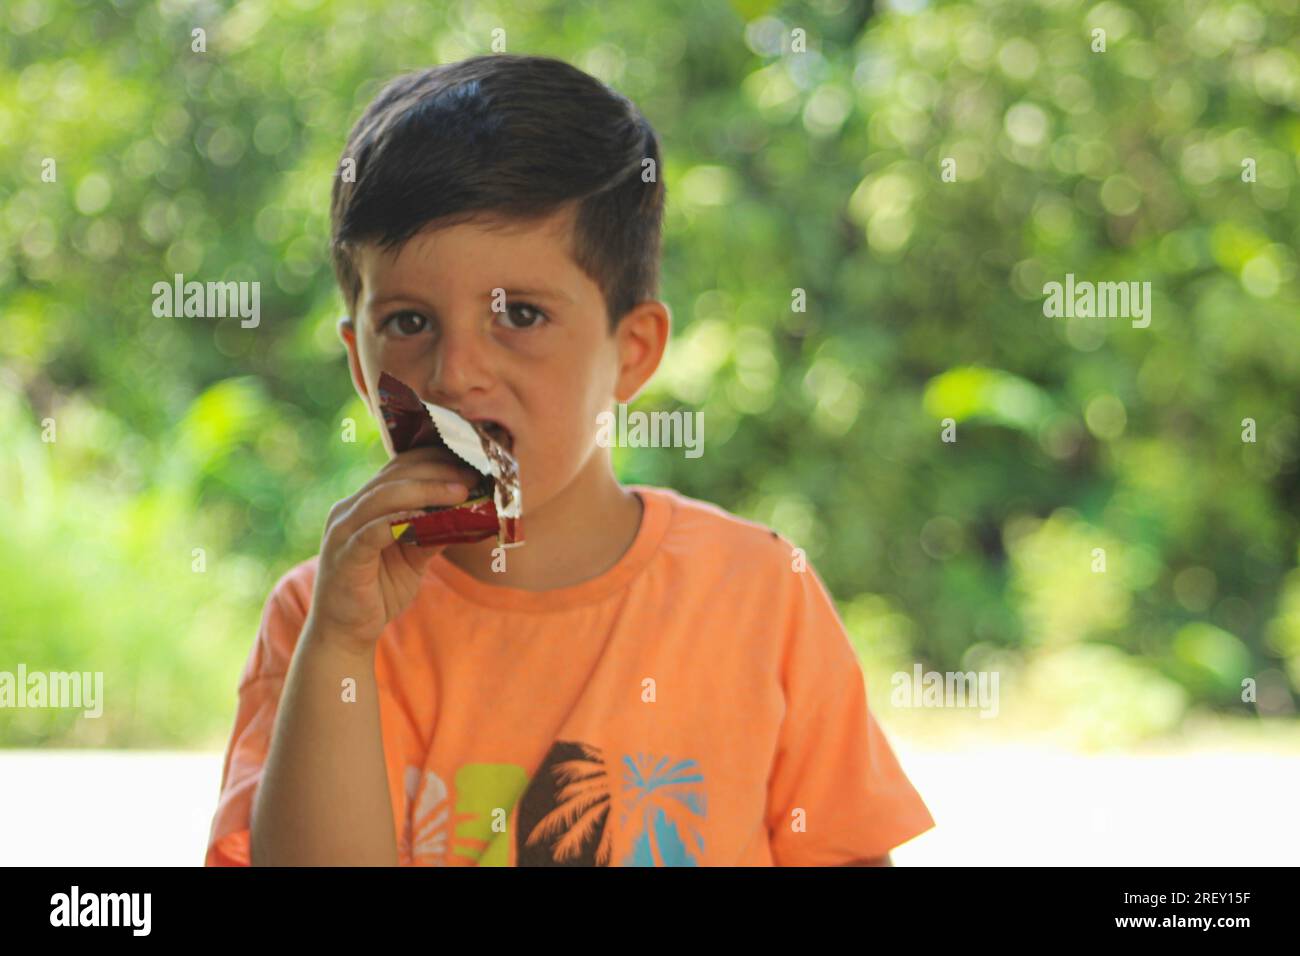 Boy eating chocolate covered wafer. Stock Photo